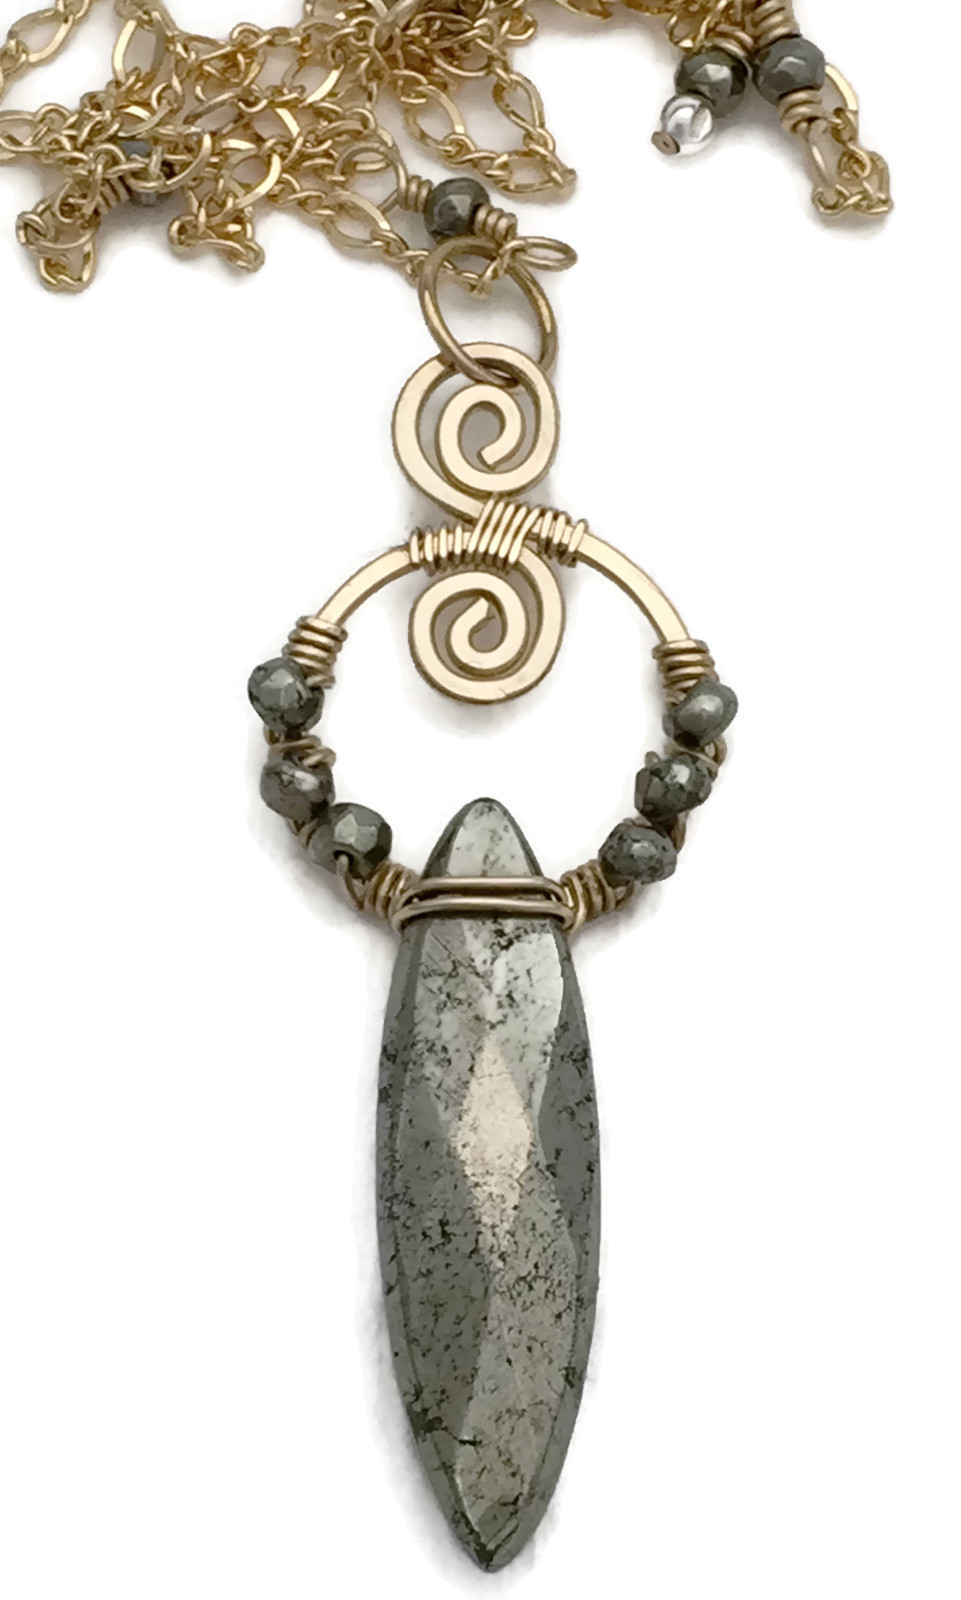 Wire Wrapped Pyrite and Gold Filled Necklace by Delia's Delight Jewelry, as gifted at GBK's 2015 Golden Globes Luxury Celebrity Gift Lounge.